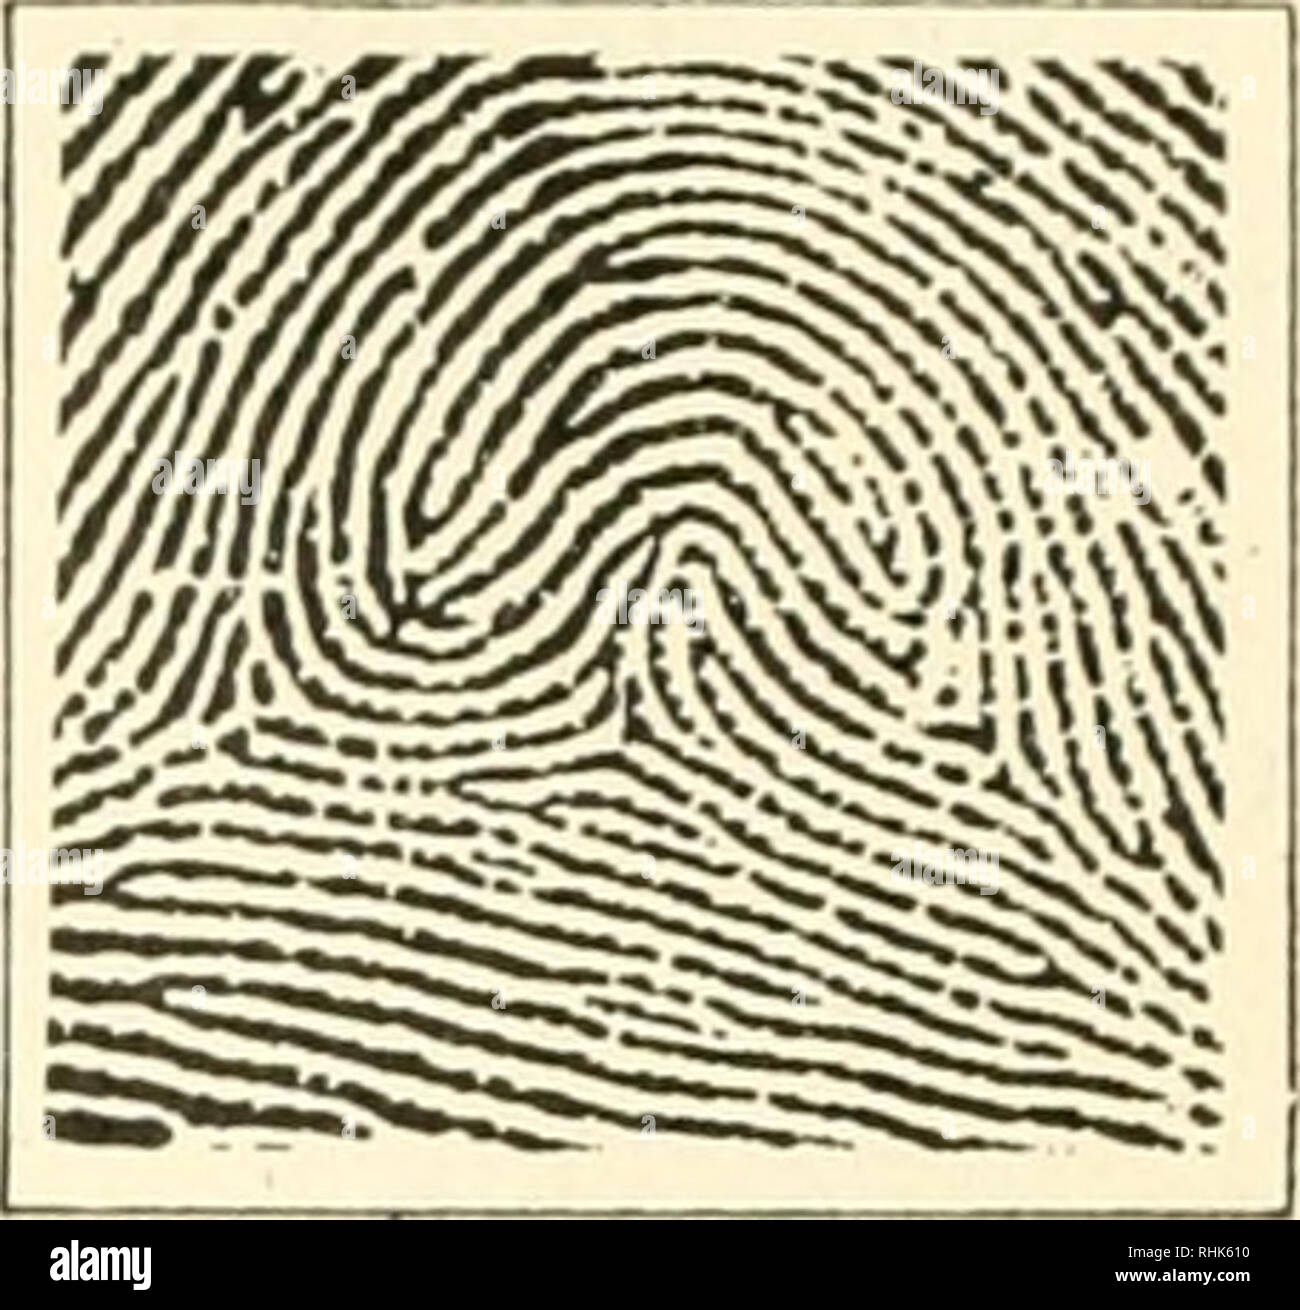 https://c8.alamy.com/comp/RHK610/biology-and-man-biology-human-beings-plain-whorl-central-pocket-loop-fingerprints-as-distinctive-as-faces-double-loop-federal-bureau-of-investigation-accidental-details-so-small-as-ordinarily-to-escape-notice-show-such-variations-that-they-serve-as-a-most-dependable-means-of-identifying-particular-individualswhether-they-are-criminals-wanted-by-the-police-or-kidnaped-businessmen-wanted-by-their-families-two-fish-may-be-of-exactly-the-same-size-or-two-leaves-on-a-tree-of-the-same-length-just-as-a-hundred-girls-may-all-weigh-exactly-ninety-nine-pounds-yet-each-is-unique-for-however-muc-RHK610.jpg